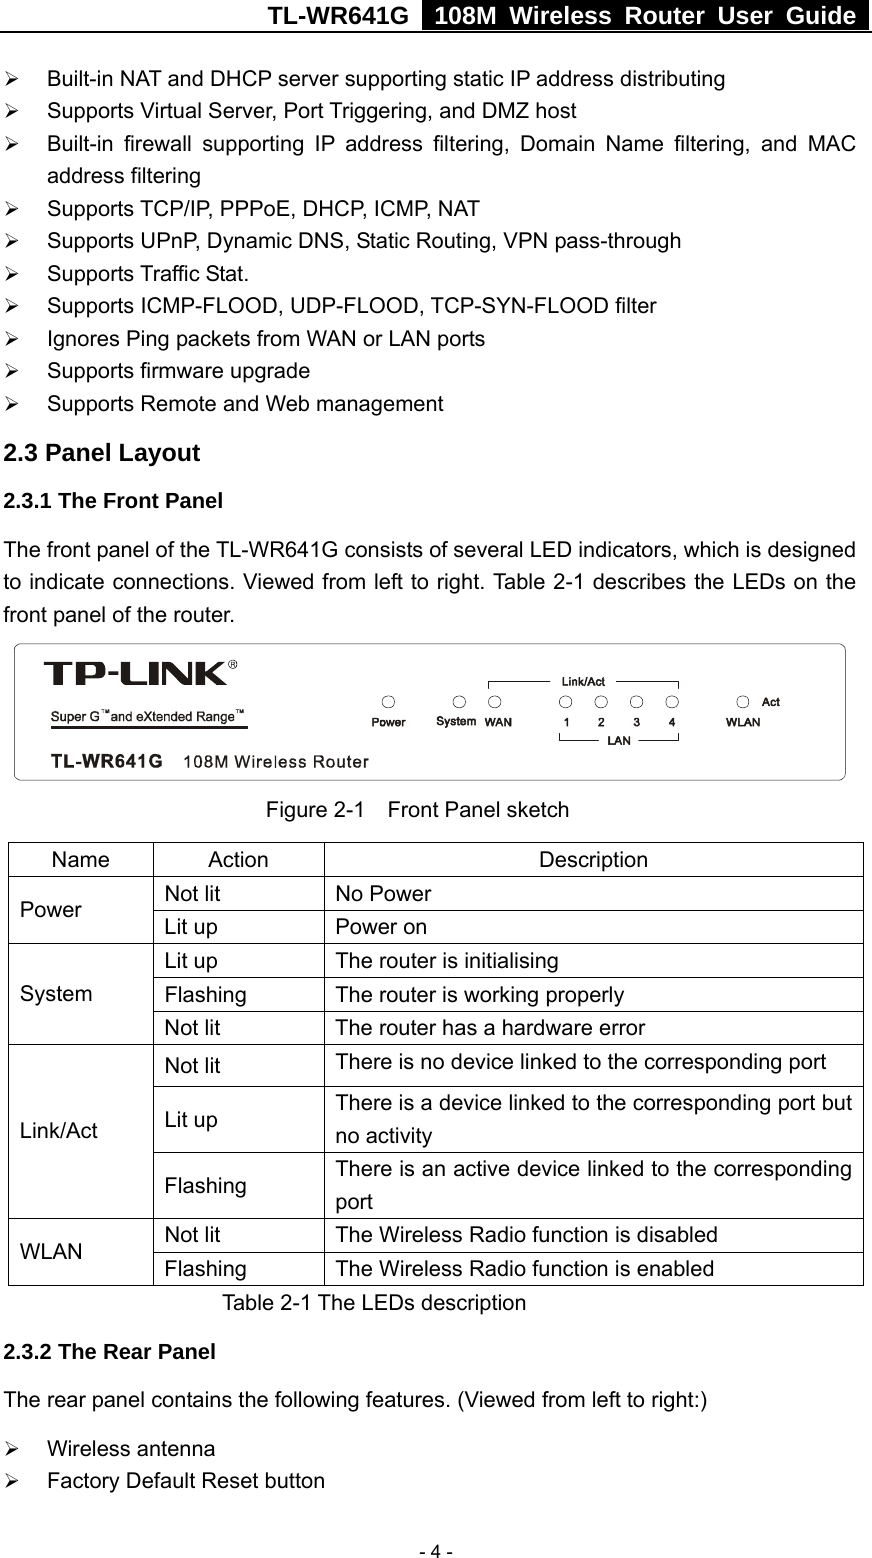 TL-WR641G   108M Wireless Router User Guide   - 4 -¾ Built-in NAT and DHCP server supporting static IP address distributing ¾ Supports Virtual Server, Port Triggering, and DMZ host ¾ Built-in firewall supporting IP address filtering, Domain Name filtering, and MAC address filtering ¾ Supports TCP/IP, PPPoE, DHCP, ICMP, NAT ¾ Supports UPnP, Dynamic DNS, Static Routing, VPN pass-through ¾ Supports Traffic Stat. ¾ Supports ICMP-FLOOD, UDP-FLOOD, TCP-SYN-FLOOD filter ¾ Ignores Ping packets from WAN or LAN ports ¾ Supports firmware upgrade ¾ Supports Remote and Web management 2.3 Panel Layout 2.3.1 The Front Panel The front panel of the TL-WR641G consists of several LED indicators, which is designed to indicate connections. Viewed from left to right. Table 2-1 describes the LEDs on the front panel of the router.             Figure 2-1  Front Panel sketch Name Action  Description Not lit  No Power Power  Lit up  Power on Lit up  The router is initialising Flashing  The router is working properly System Not lit  The router has a hardware error Not lit  There is no device linked to the corresponding port Lit up  There is a device linked to the corresponding port but no activity Link/Act Flashing  There is an active device linked to the corresponding port Not lit  The Wireless Radio function is disabled WLAN  Flashing  The Wireless Radio function is enabled    Table 2-1 The LEDs description 2.3.2 The Rear Panel The rear panel contains the following features. (Viewed from left to right:) ¾ Wireless antenna ¾ Factory Default Reset button 